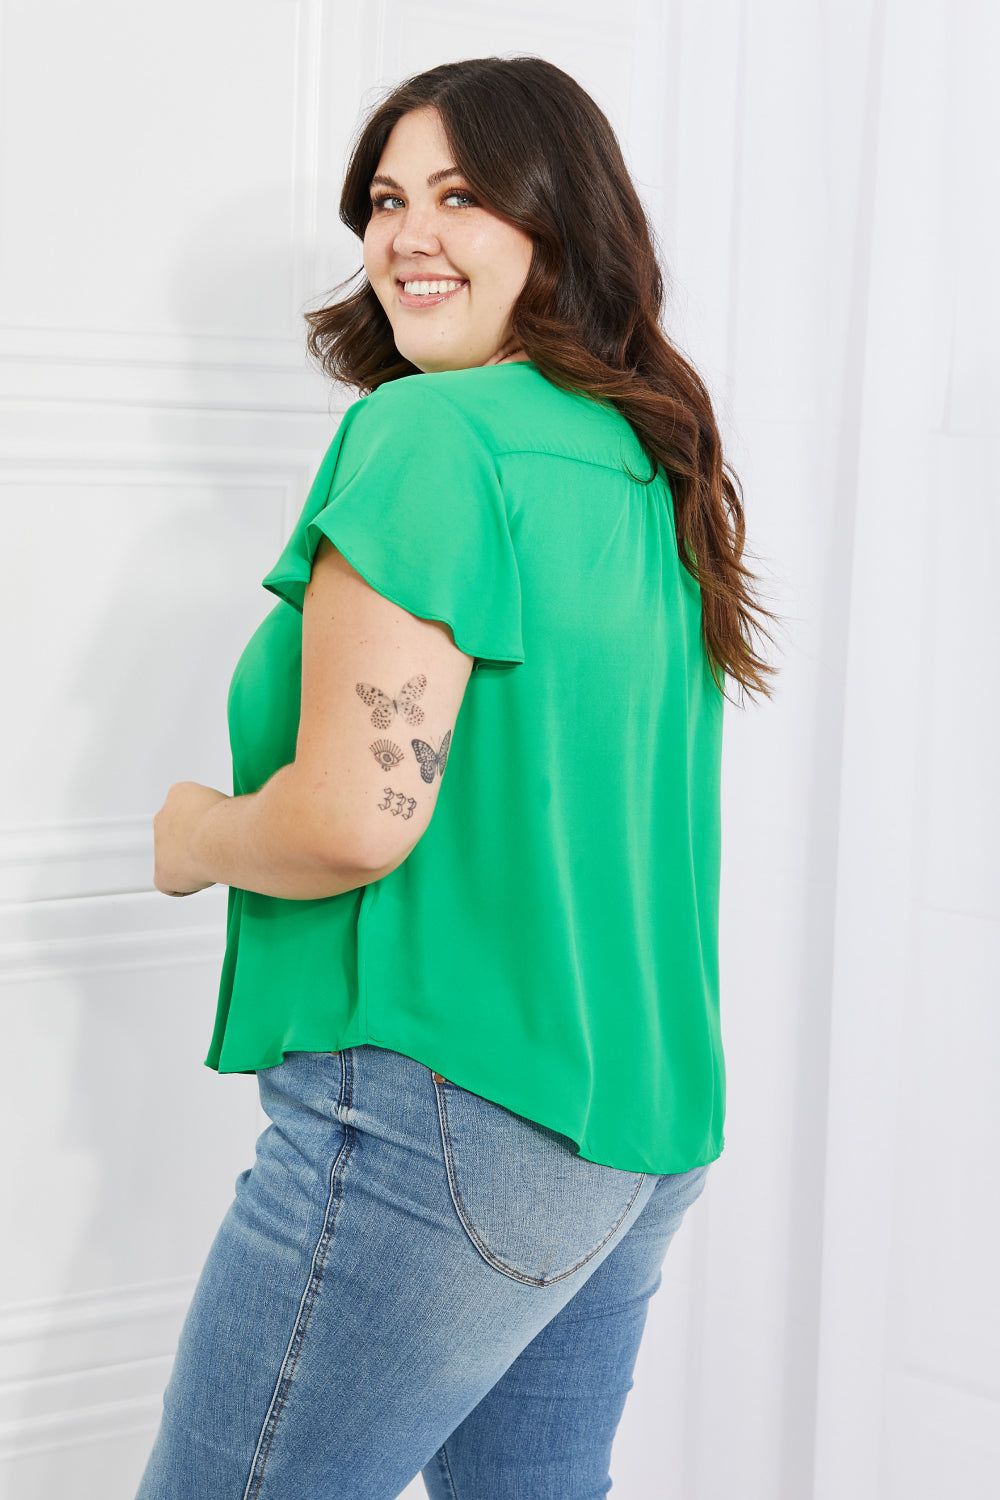 Sew In Love Just For You Full Size Short Ruffled sleeve length Top in Green - us.meeeshop